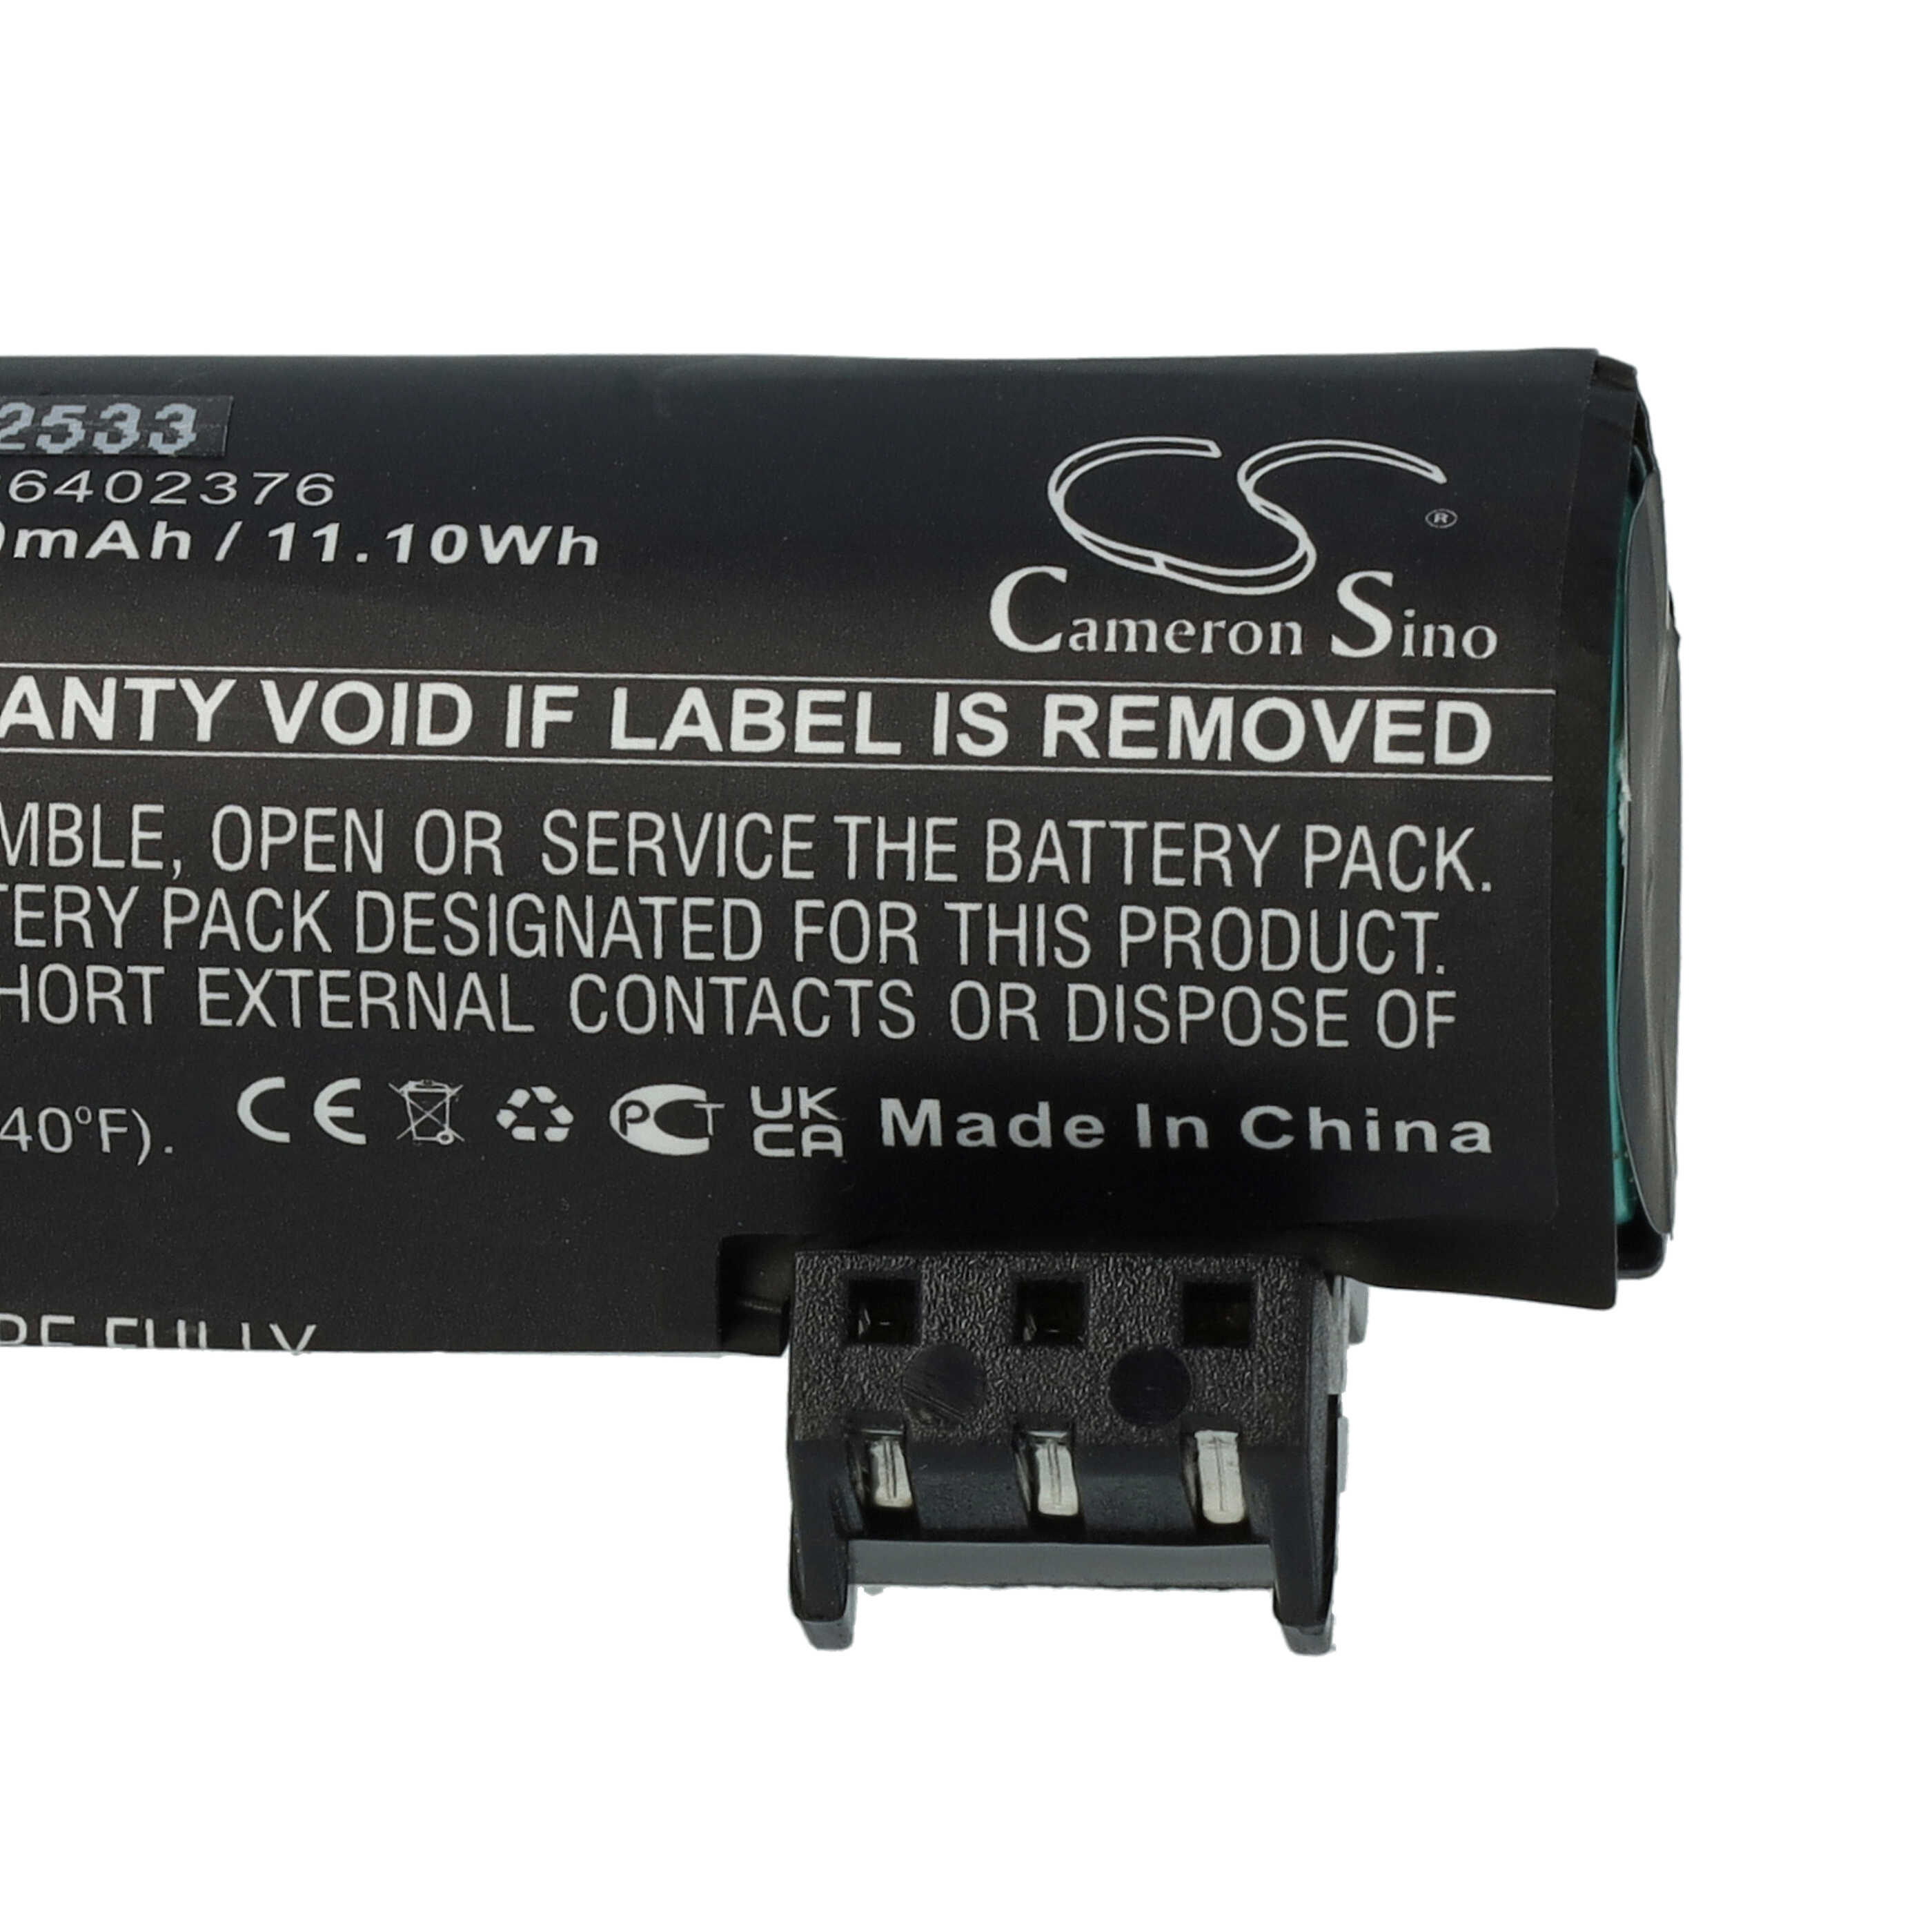 Barcode Scanner POS Battery Replacement for Ingenico F12432566, F26402376 - 3000mAh 3.7V Li-Ion